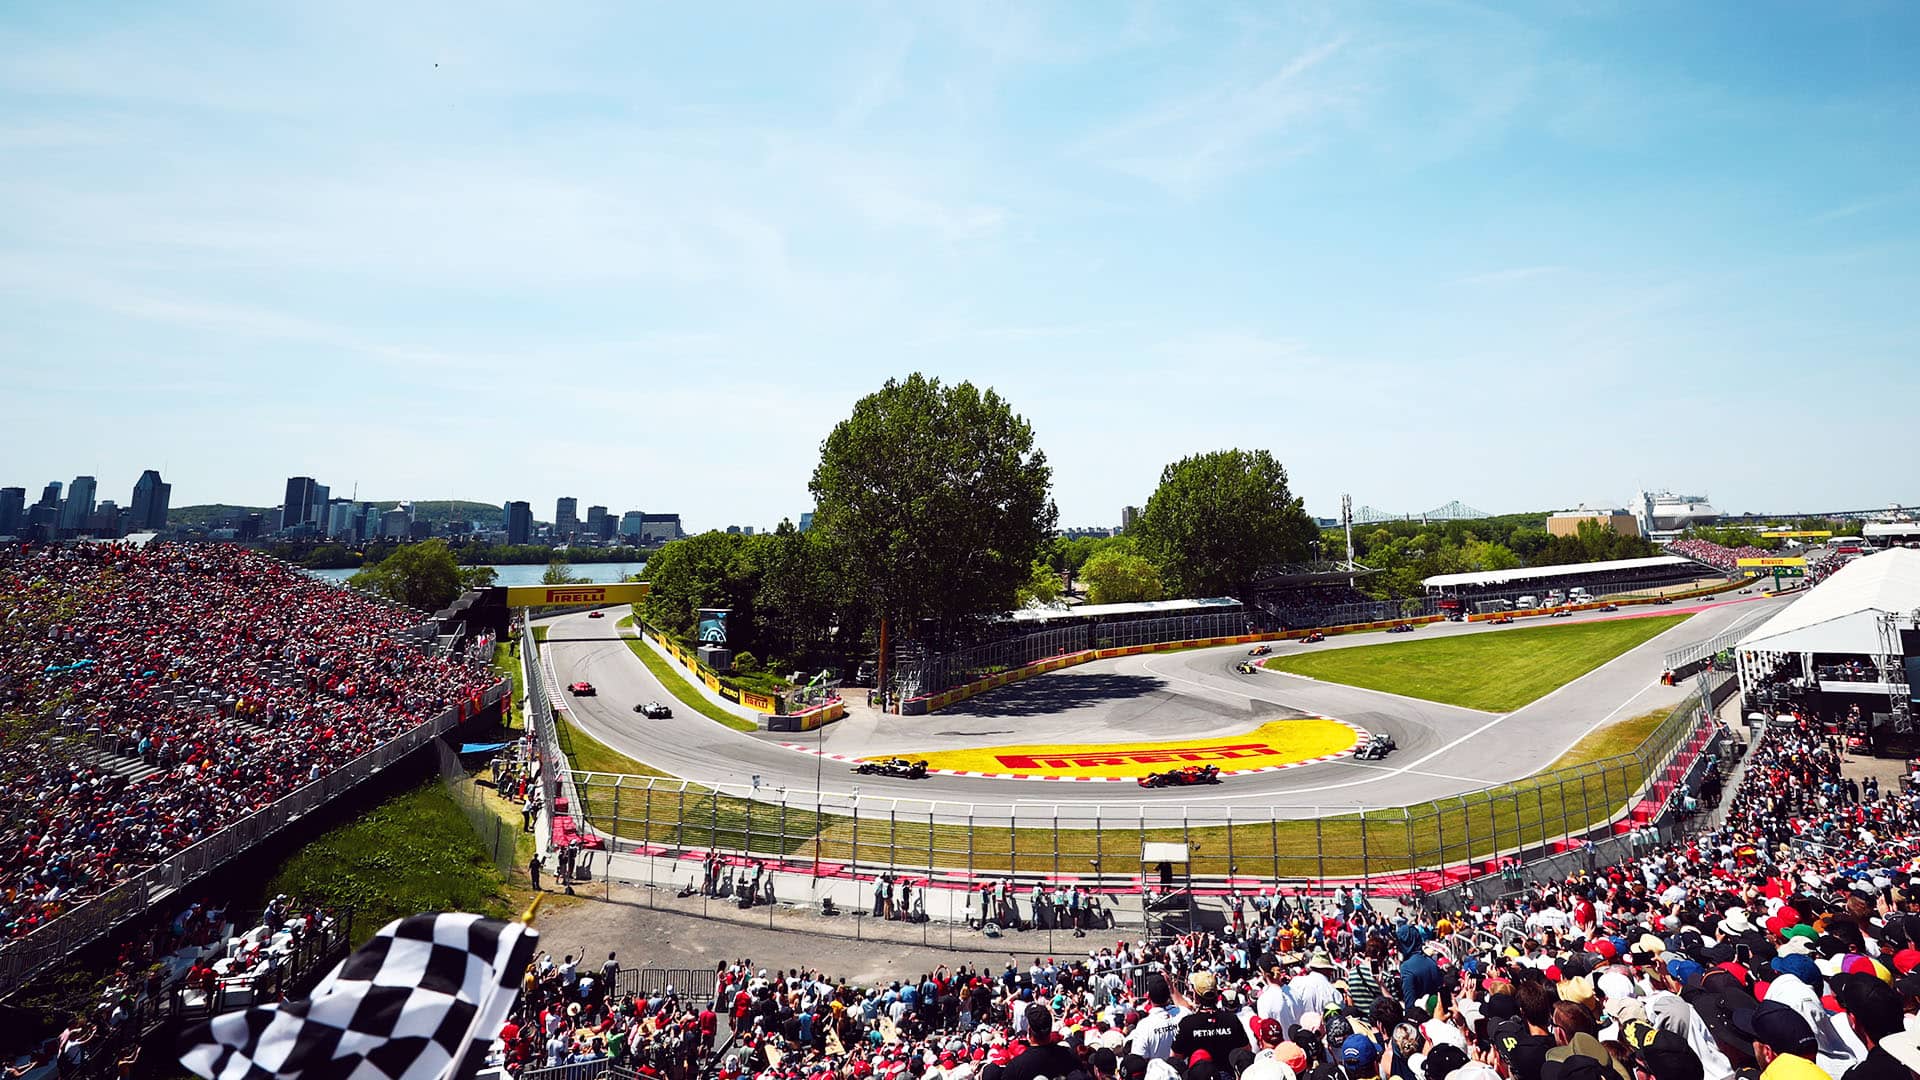 Canadian Grand Prix 2022: Live, TV Coverage, and Schedule of the F1 Canadian GP